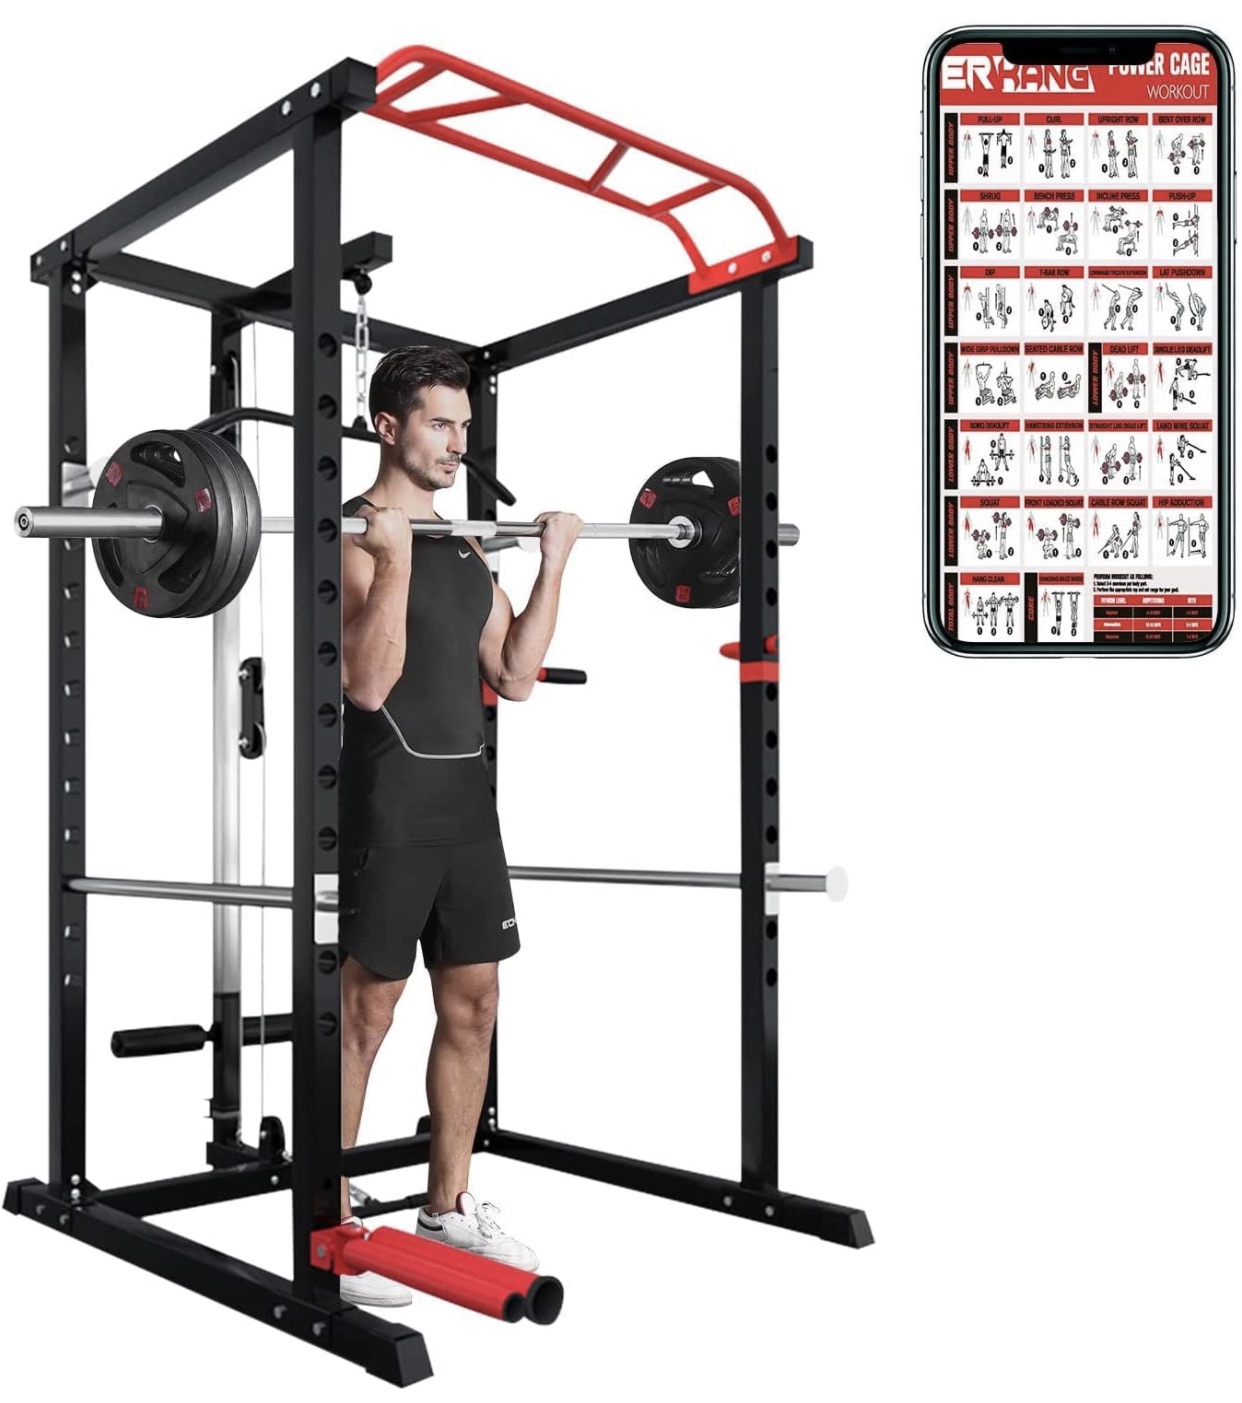 360 Degree Landmine 1000 lbs Light Commercial Weight Cage with LAT Pull-Down Pulley System ER KANG Olympic Power Cage Dip Bars and Other Attachments 